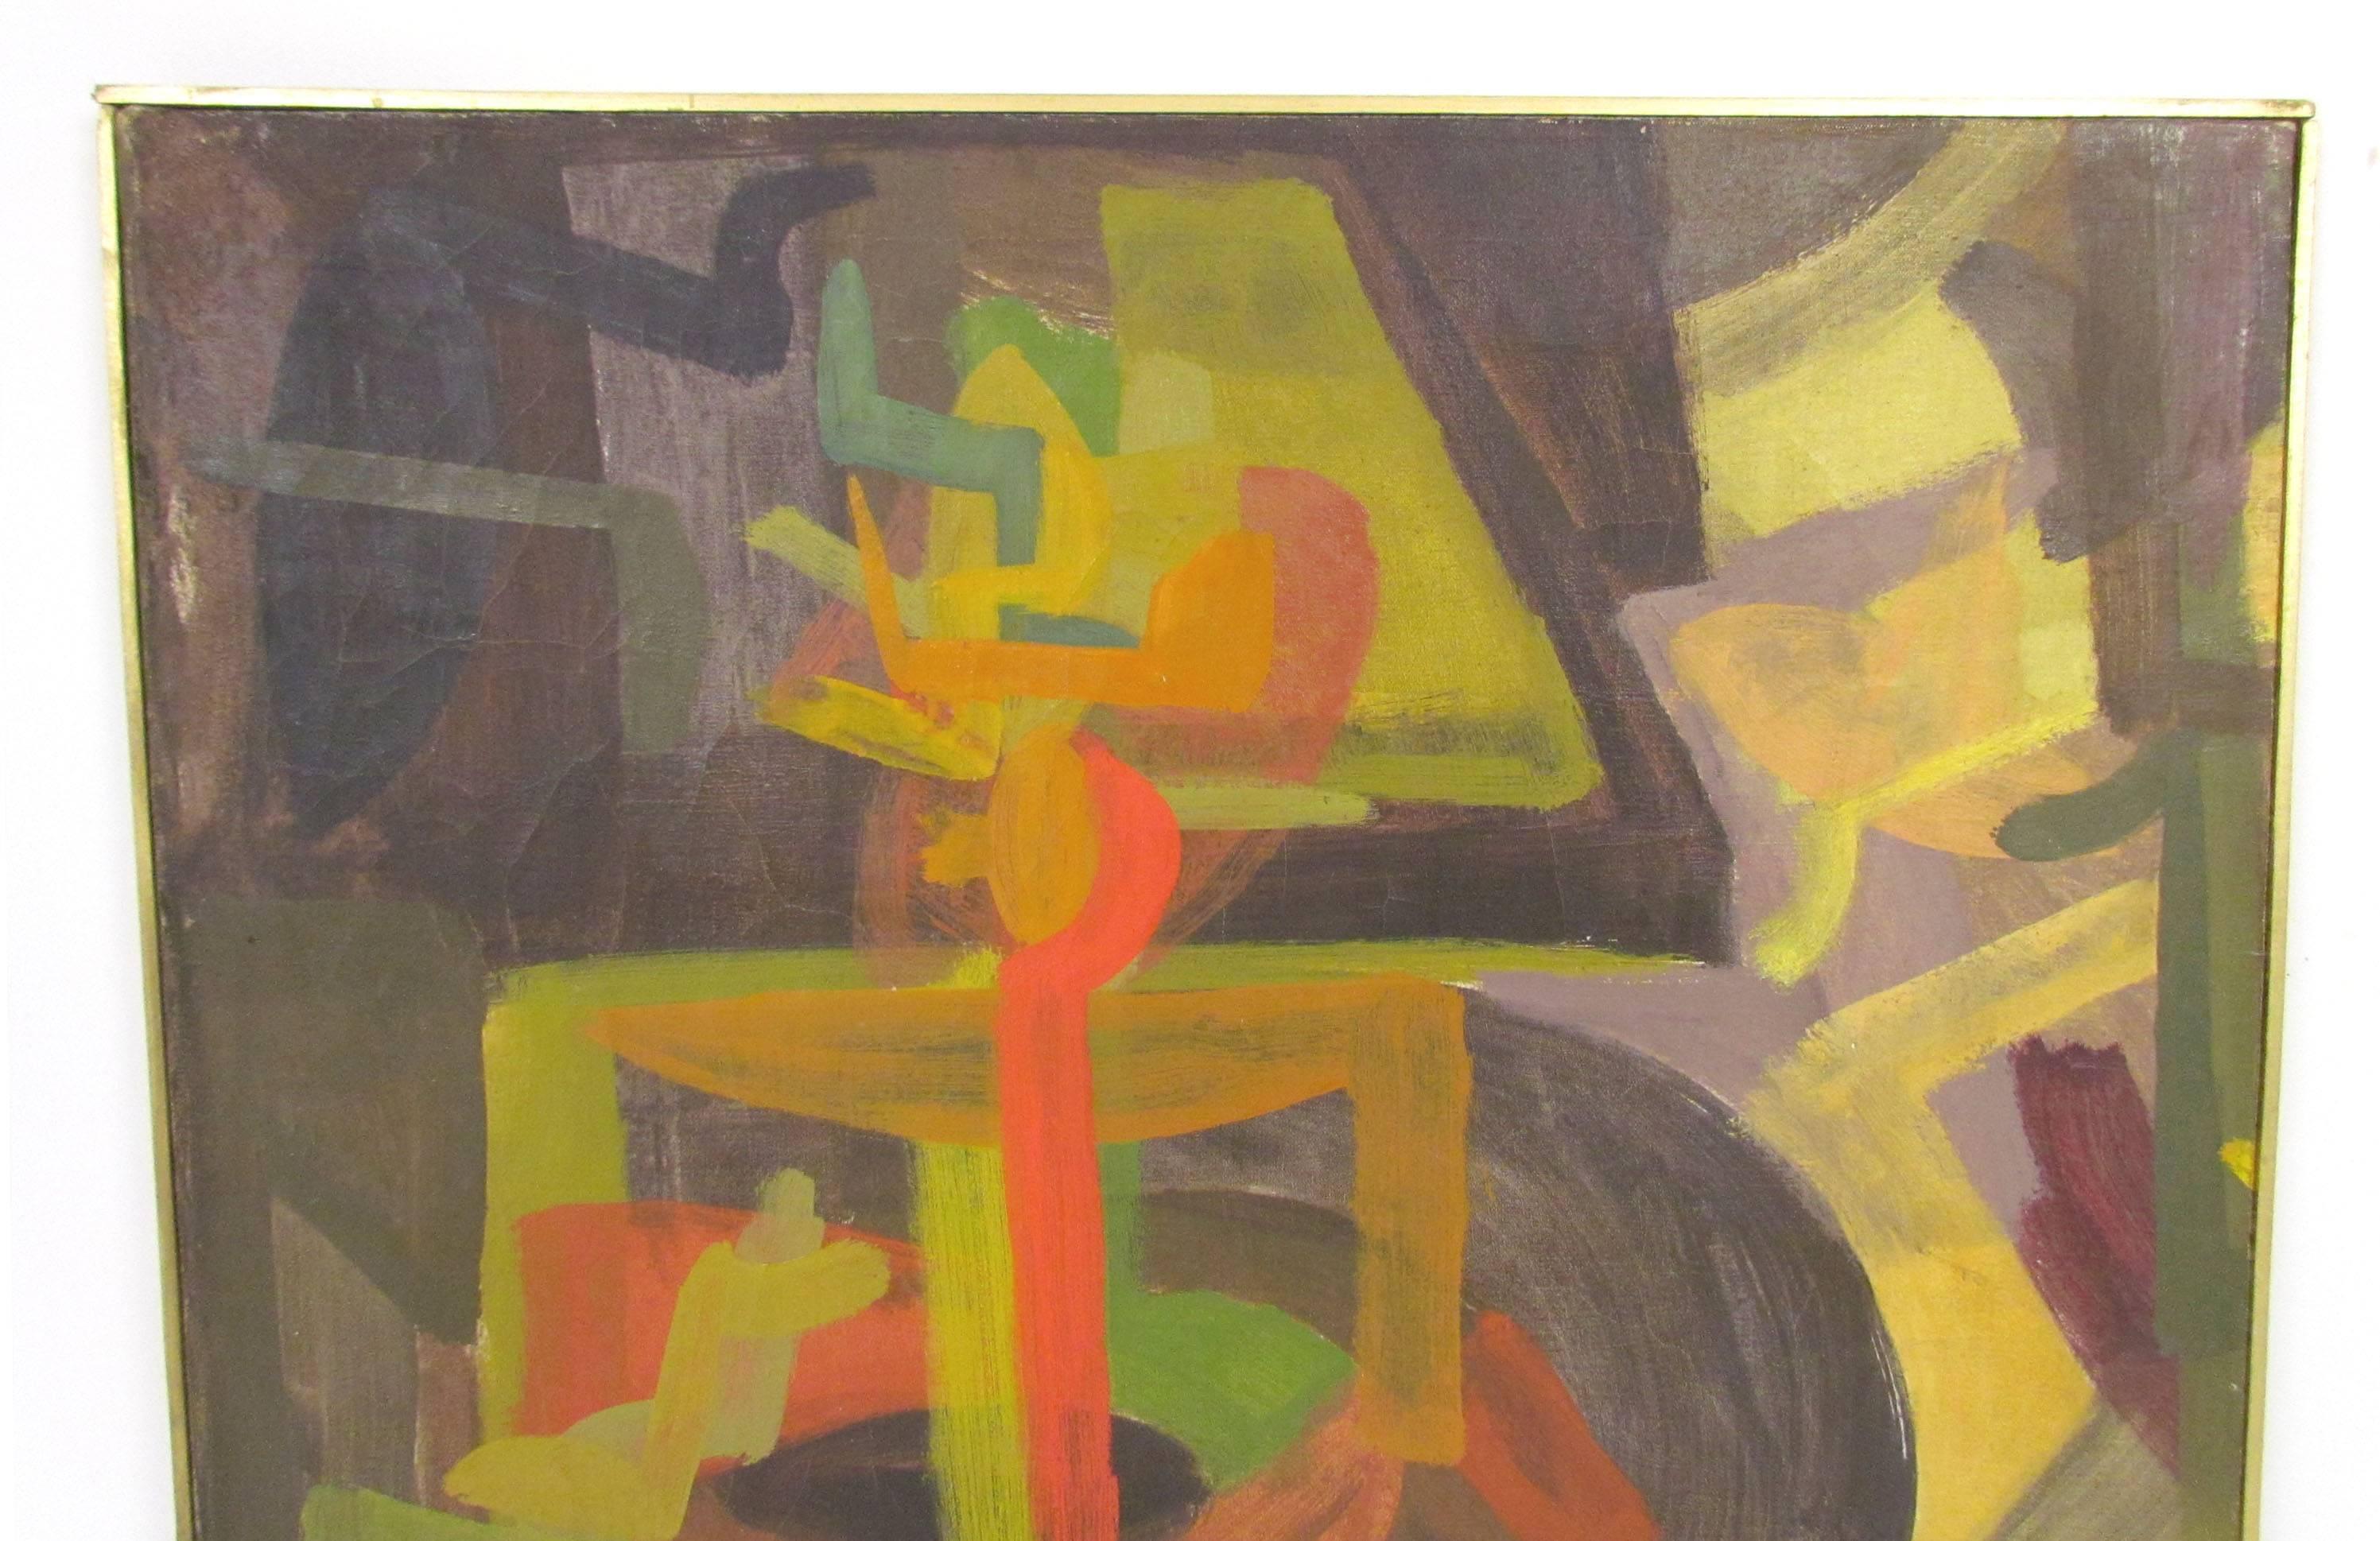 Abstract symbolist oil painting by Harold Mesibov, dated 1954.

Biography via Askart, supplied by The Boston Art Club:

